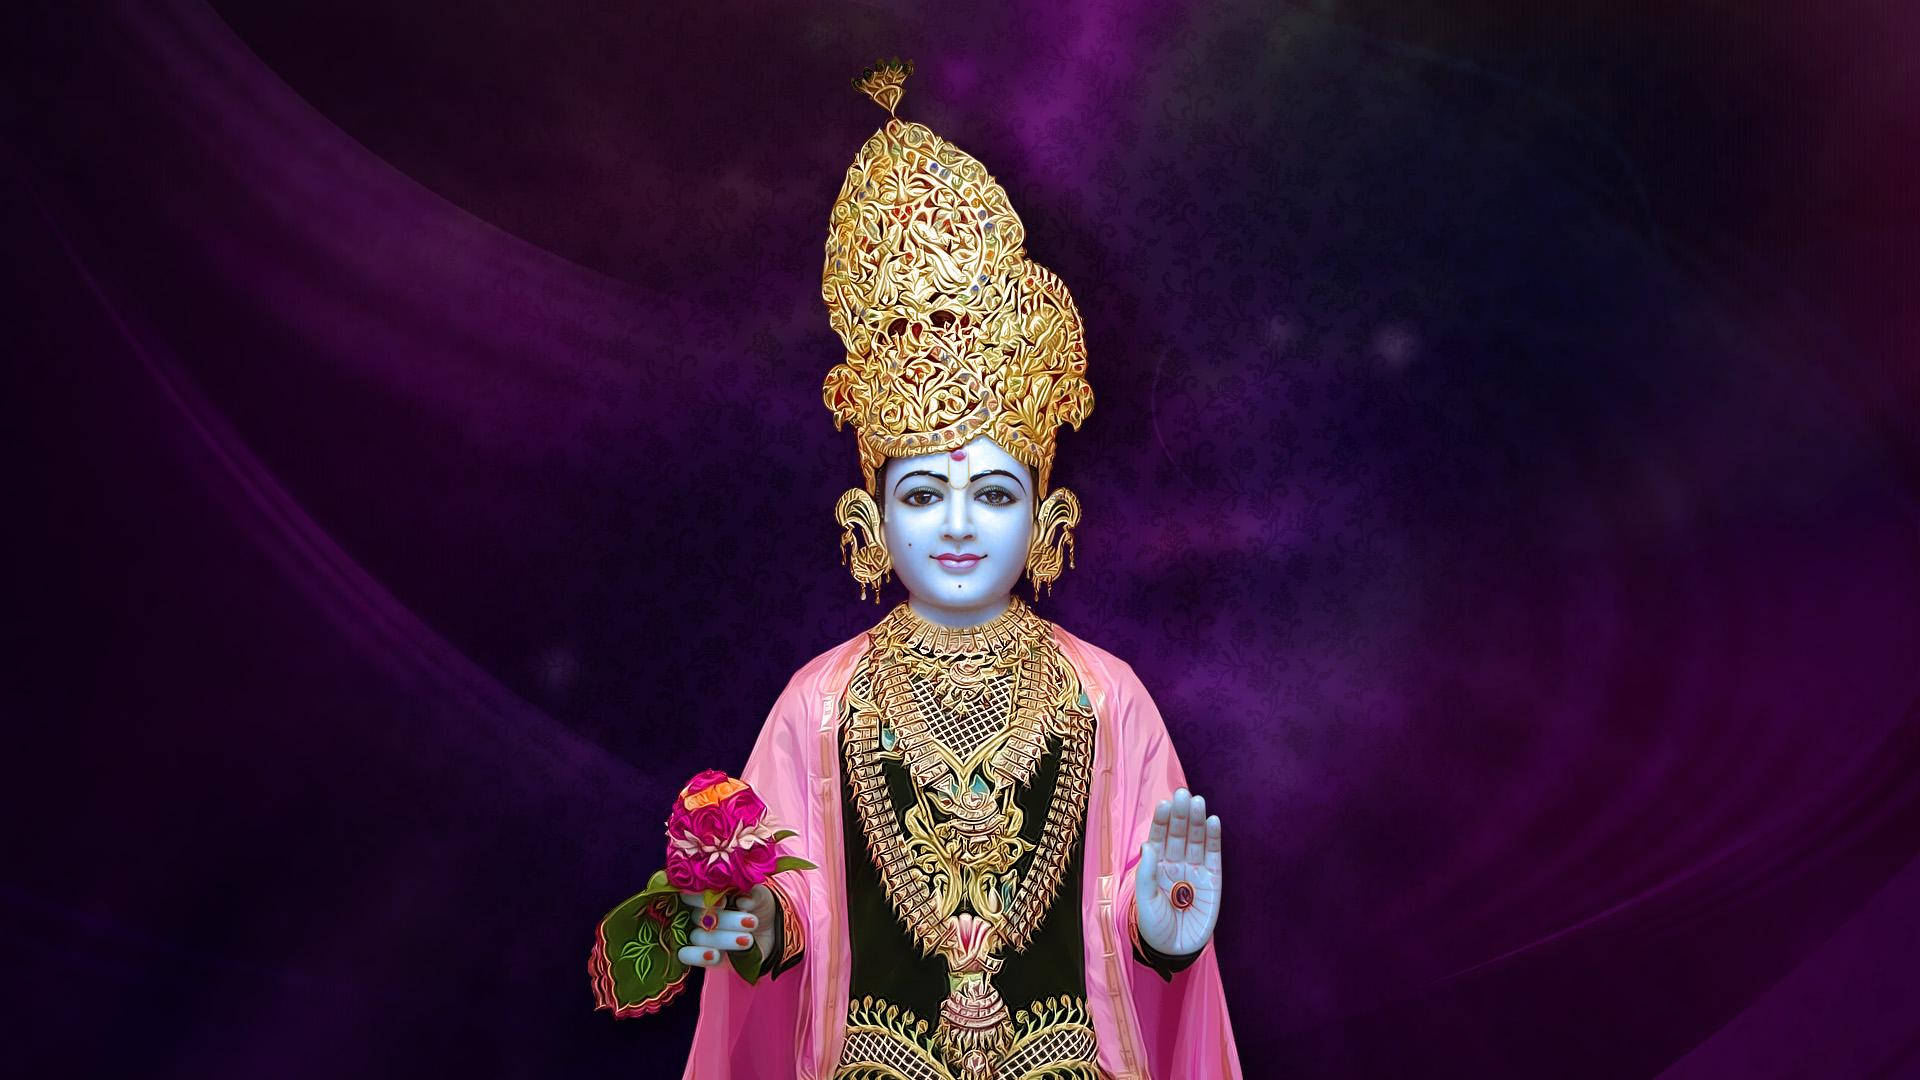 Swaminarayan Covered In Jewelry Background